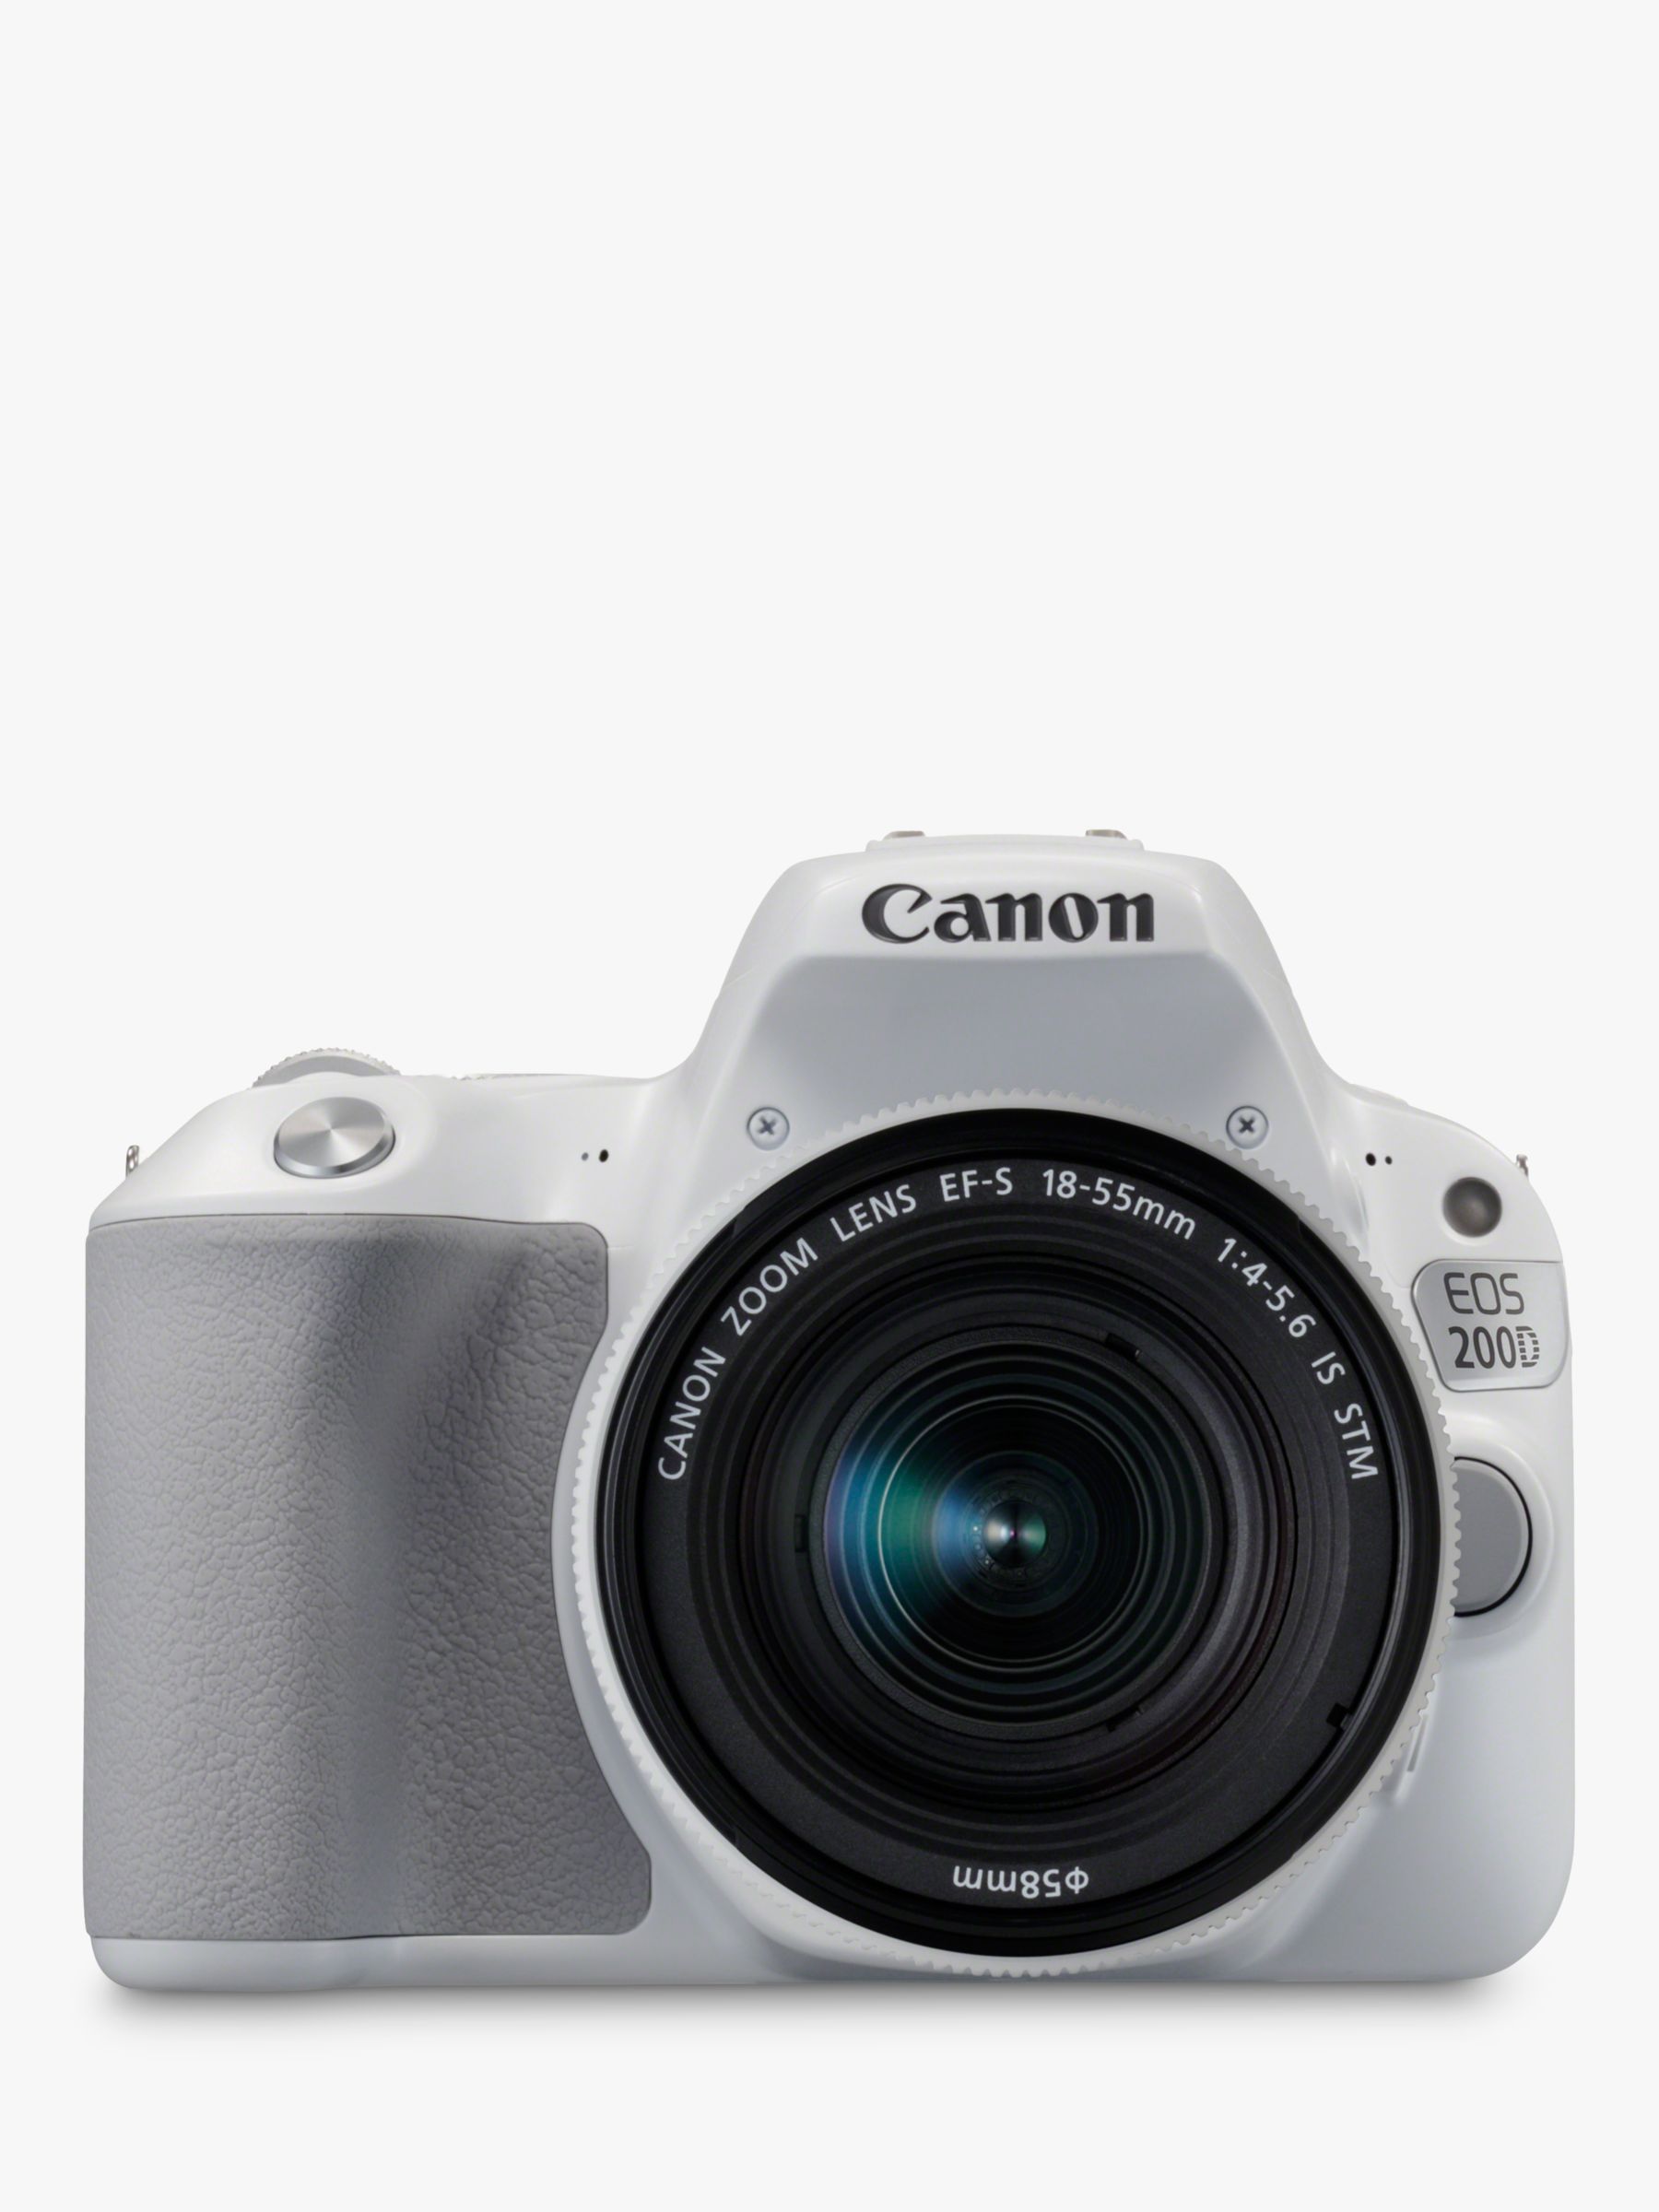 Canon EOS 200D Digital SLR Camera with 18-55mm f/4-5.6 IS STM Lens, 1080p Full HD, 24.2MP, Wi-Fi, Bluetooth, NFC, Optical Viewfinder, 3 Vari-angle Touch Screen, White